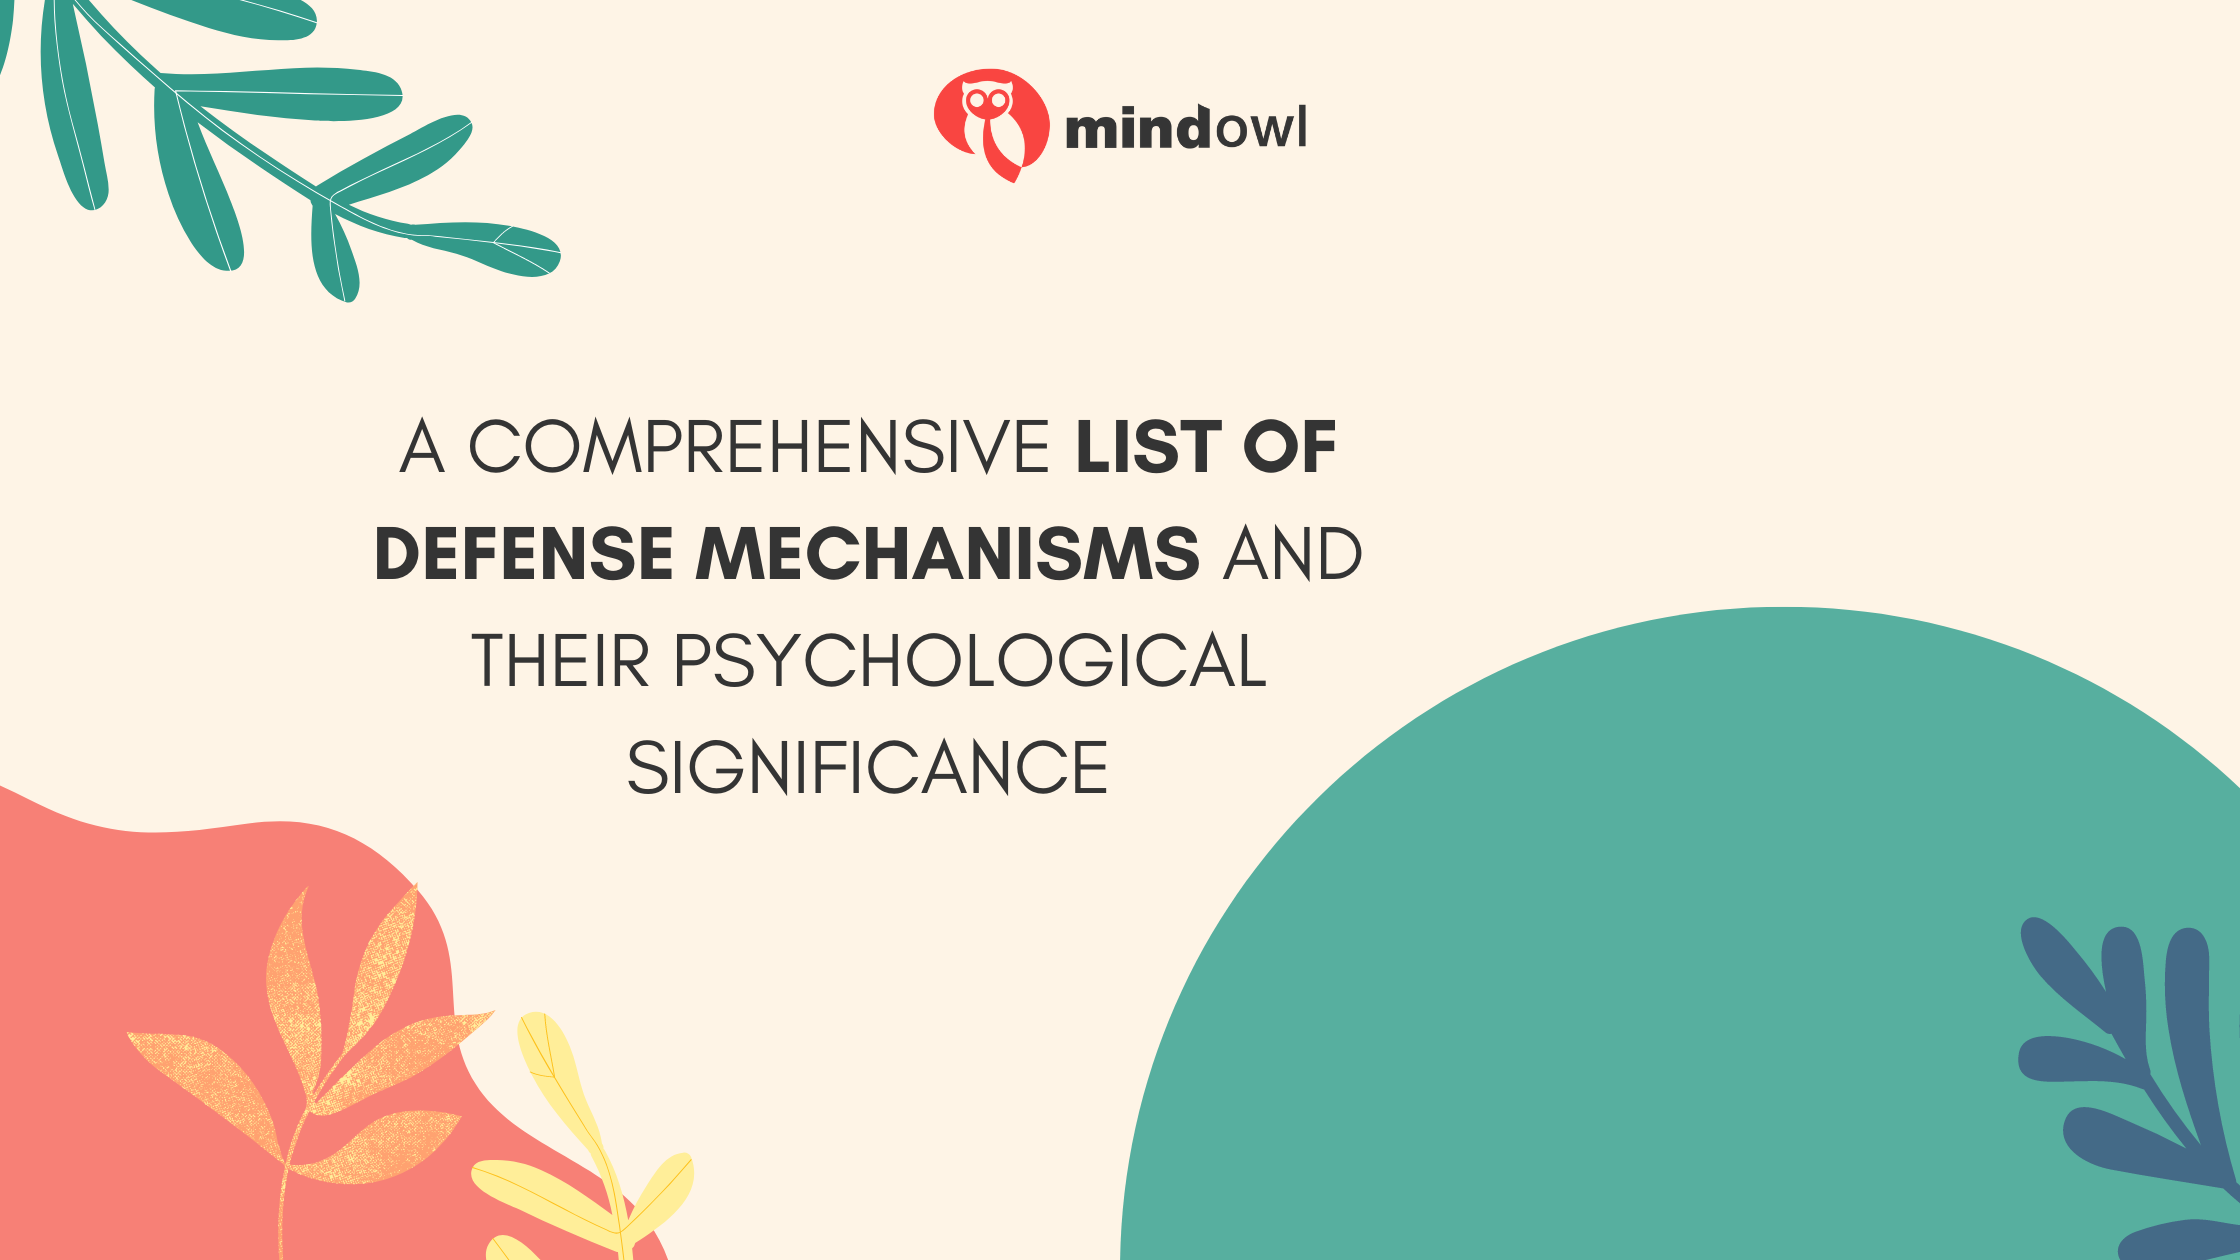 A Comprehensive List Of Defense Mechanisms And Their Psychological Significance